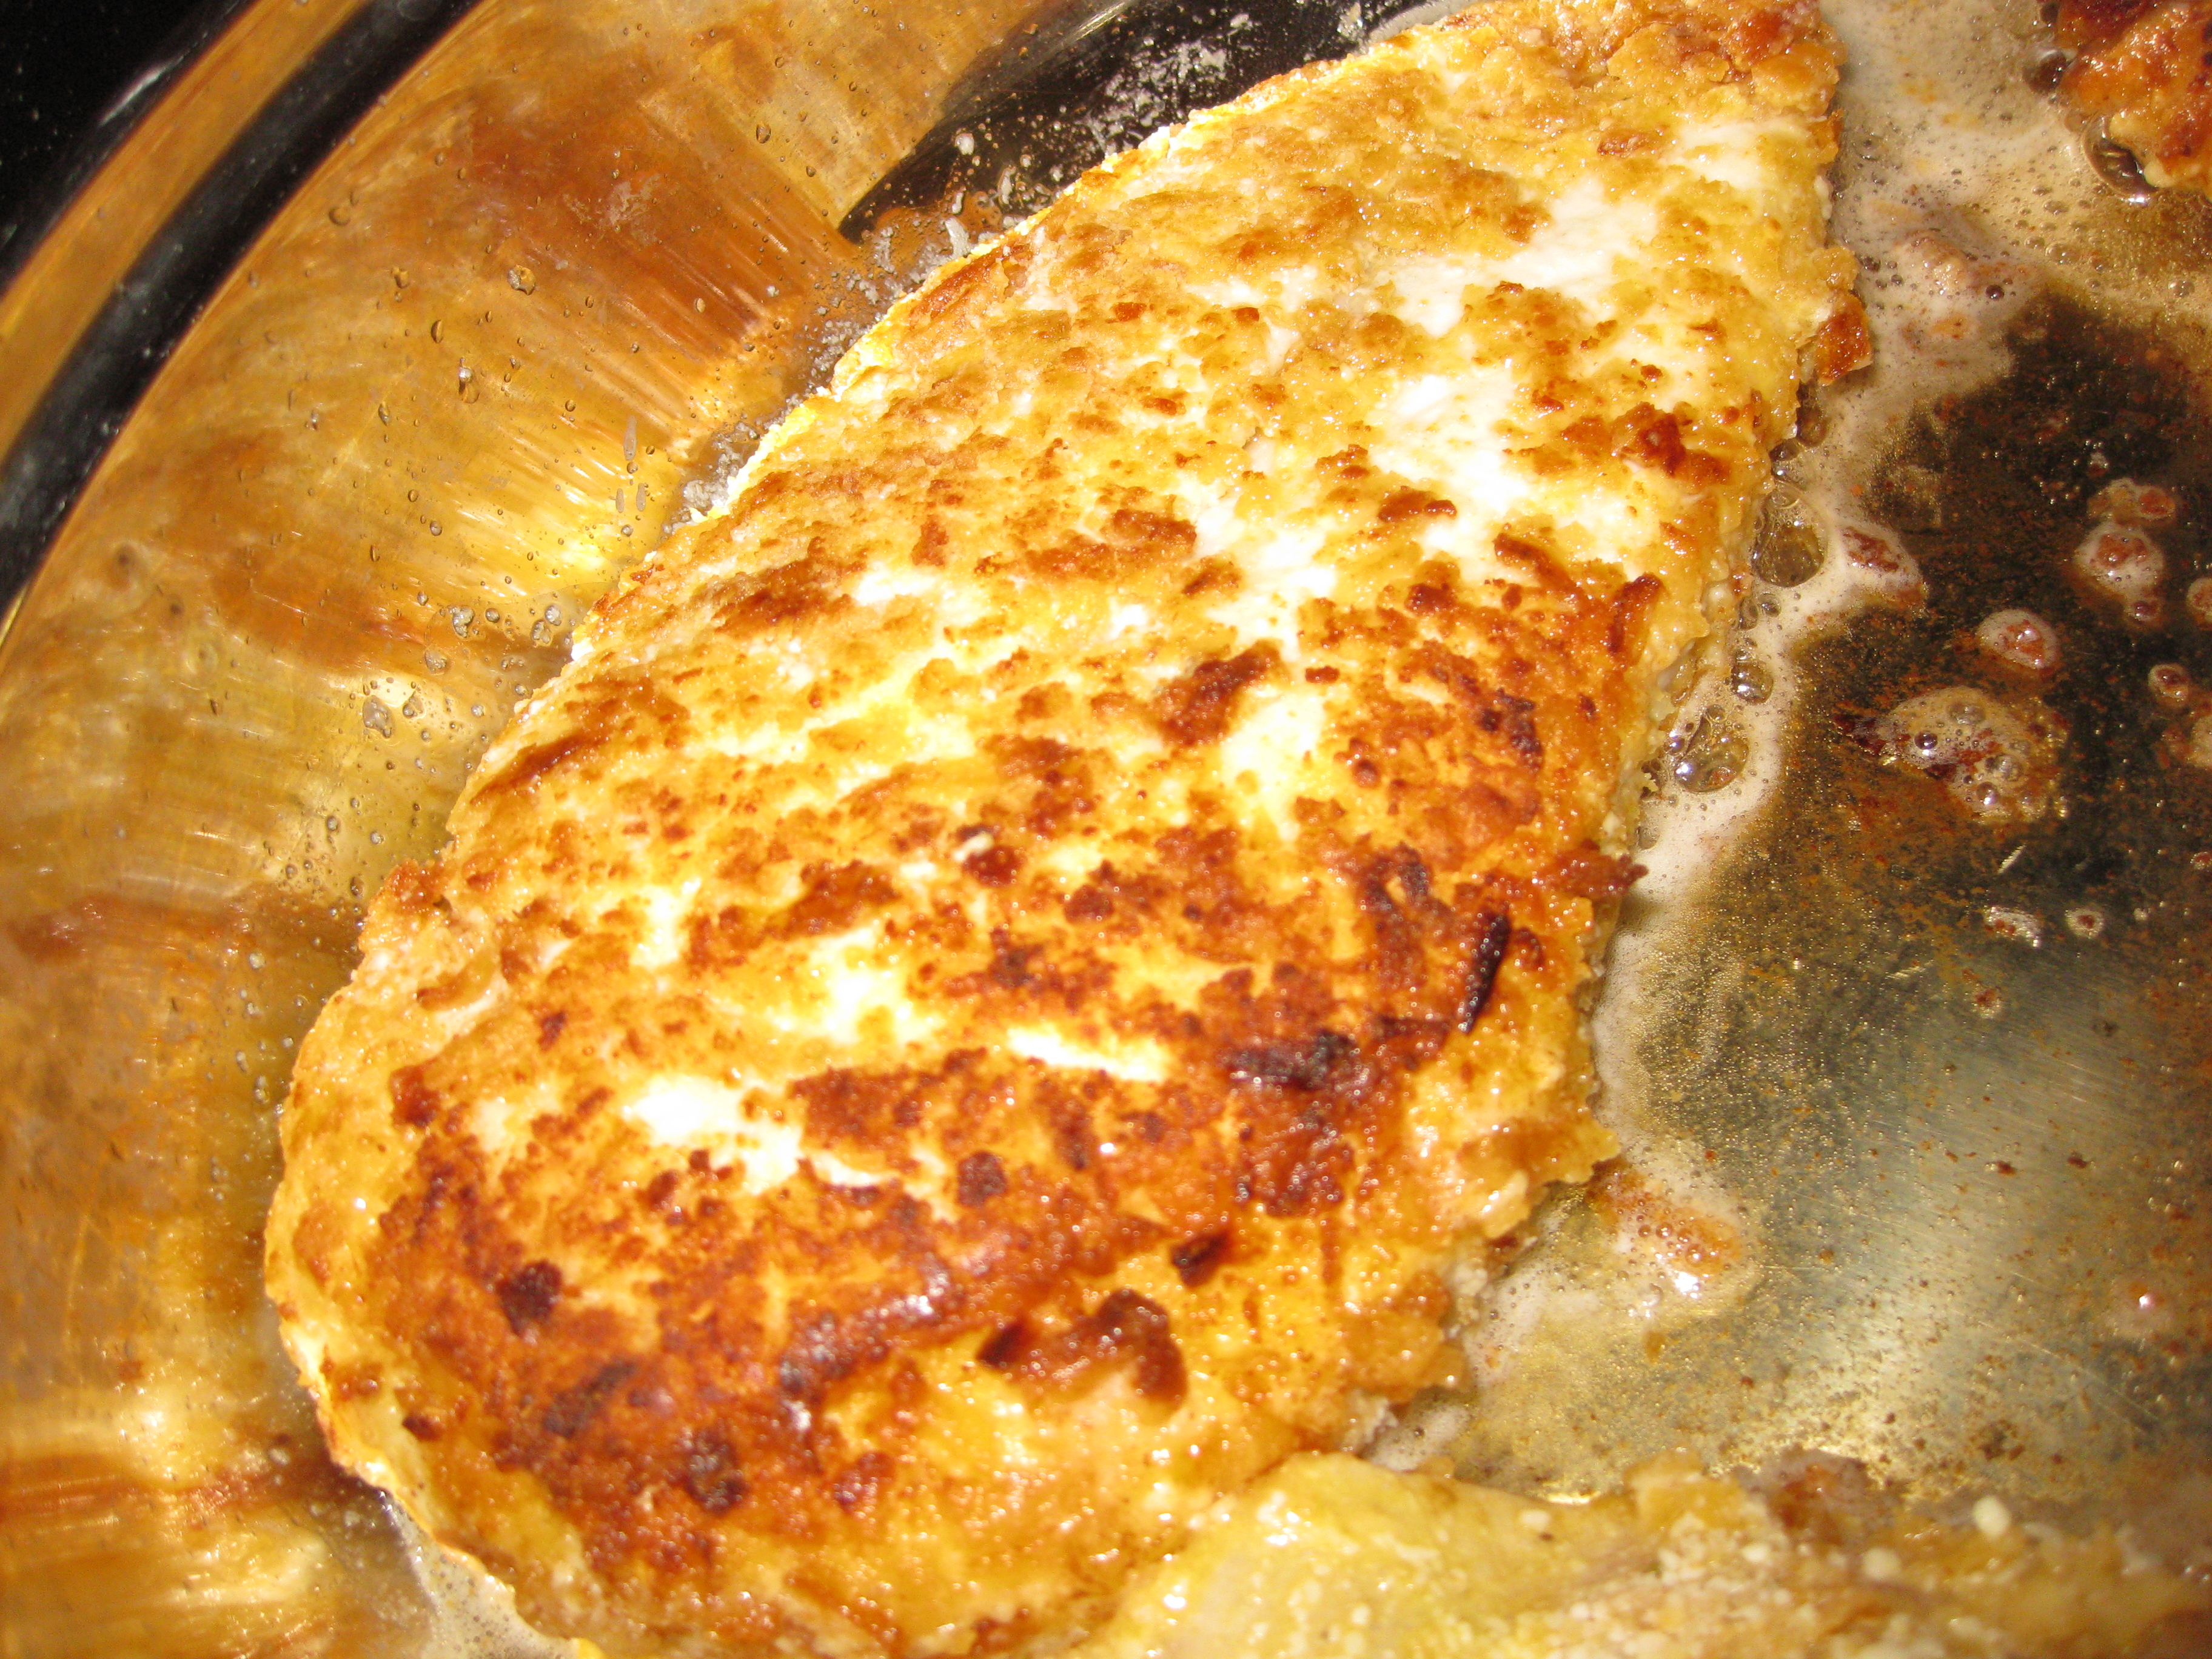 baked chicken breast with bread crumbs dredge